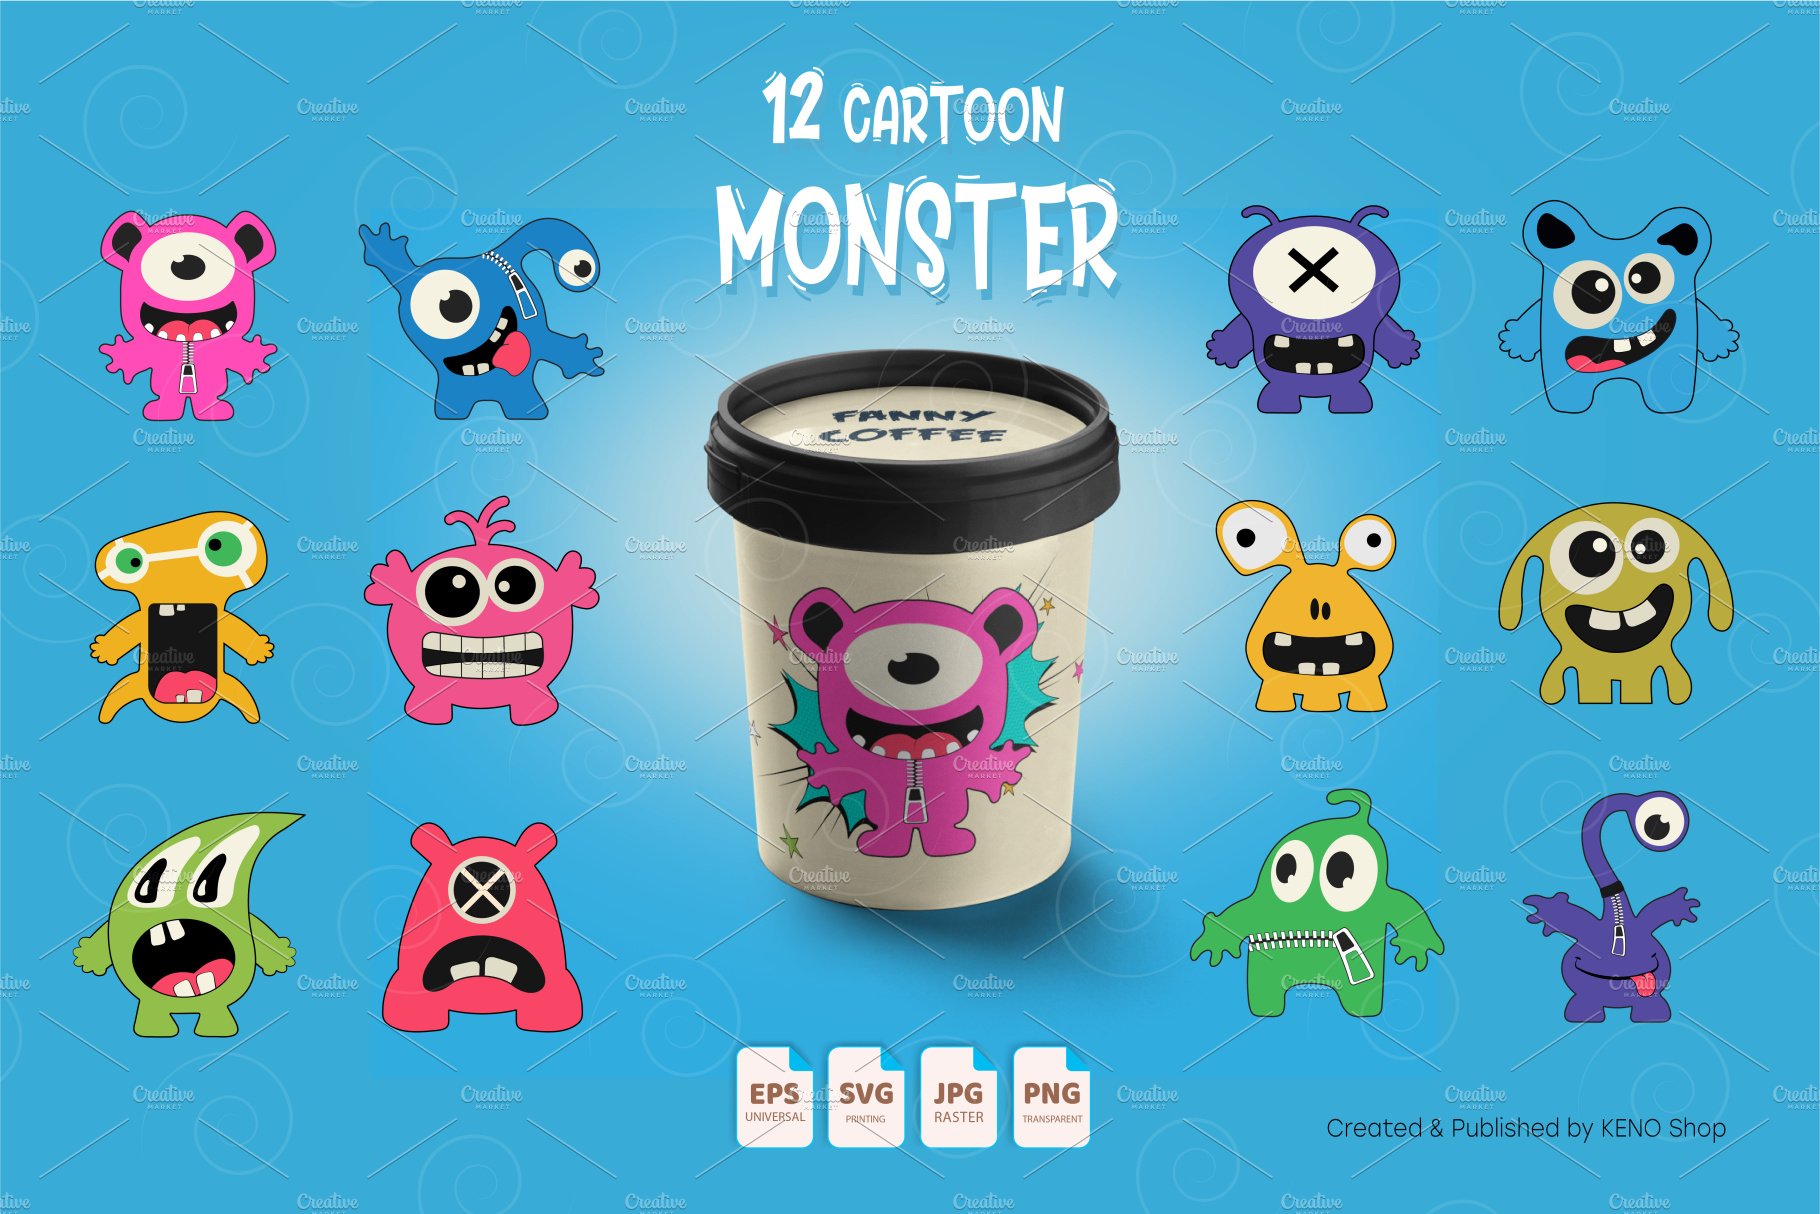 12 Cartoon Monsters. preview image.